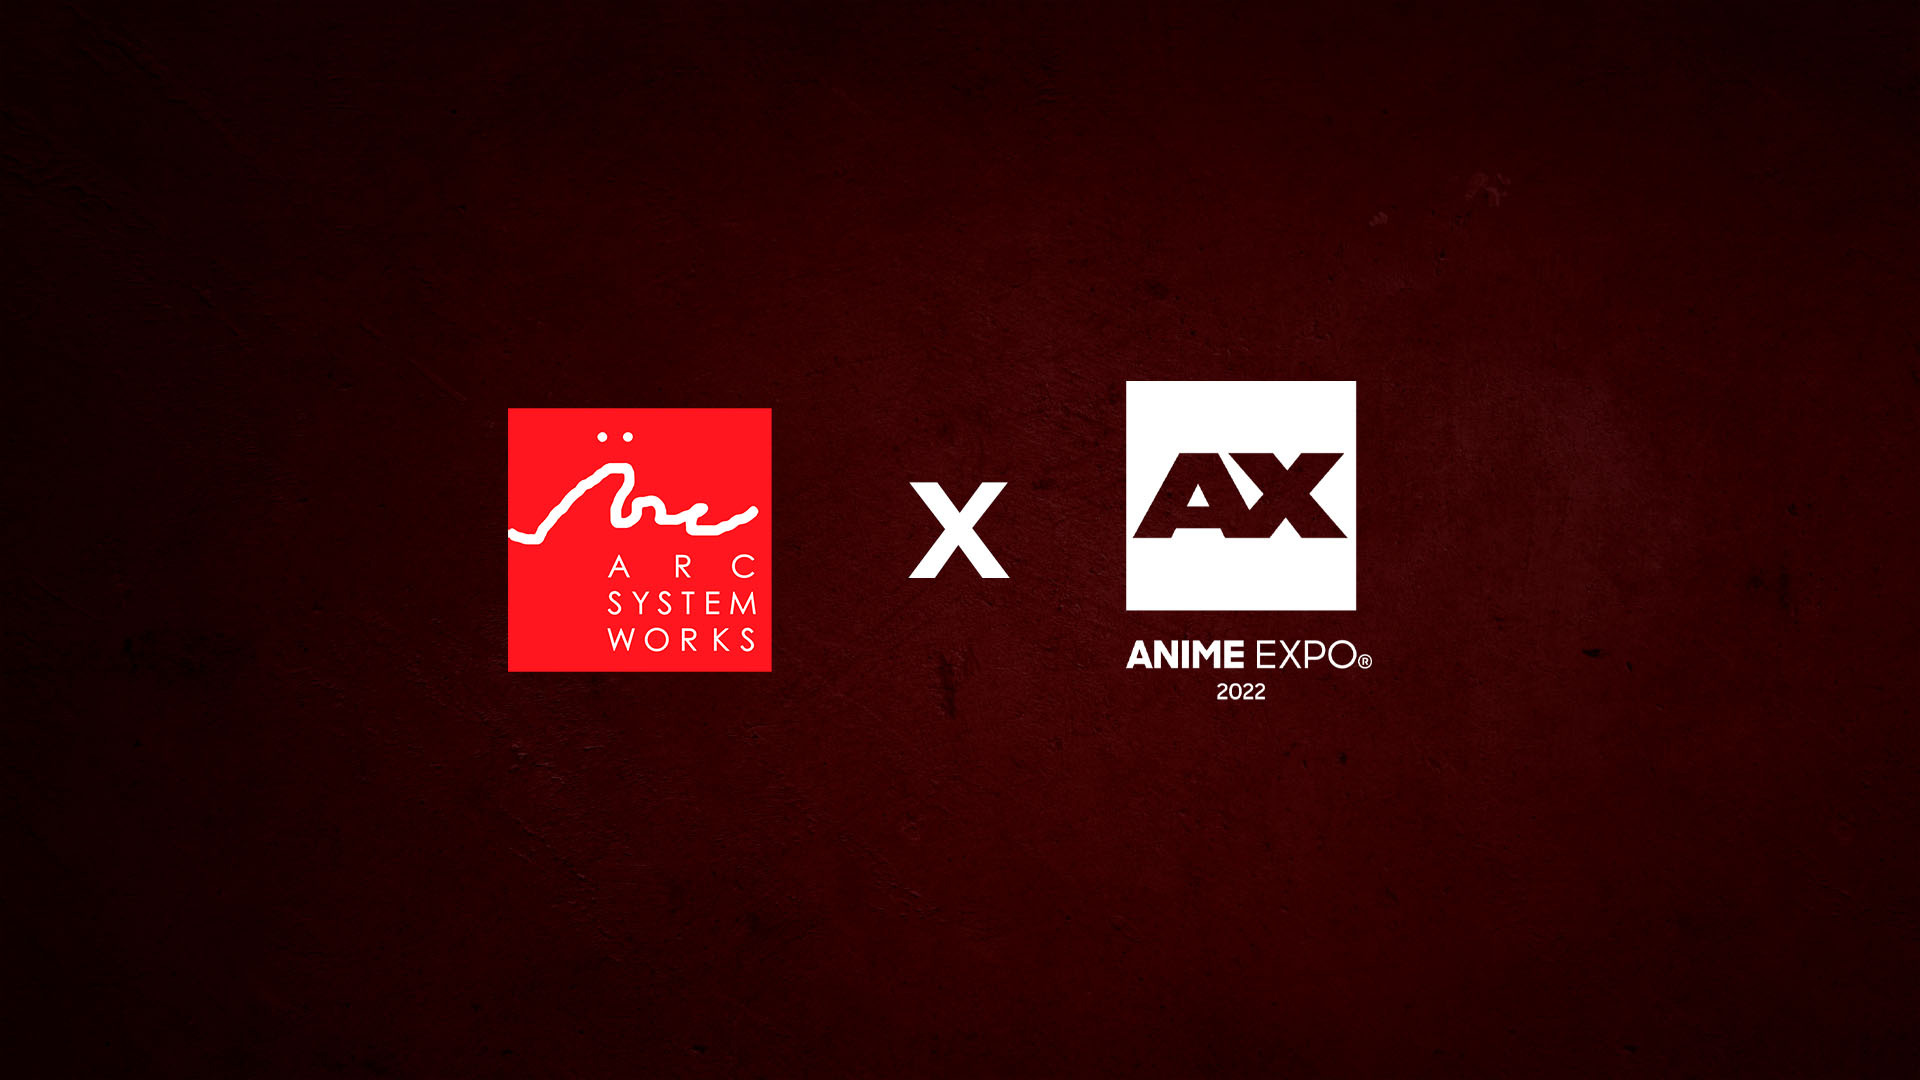 Arc System Works heads to Anime Expo 2022!